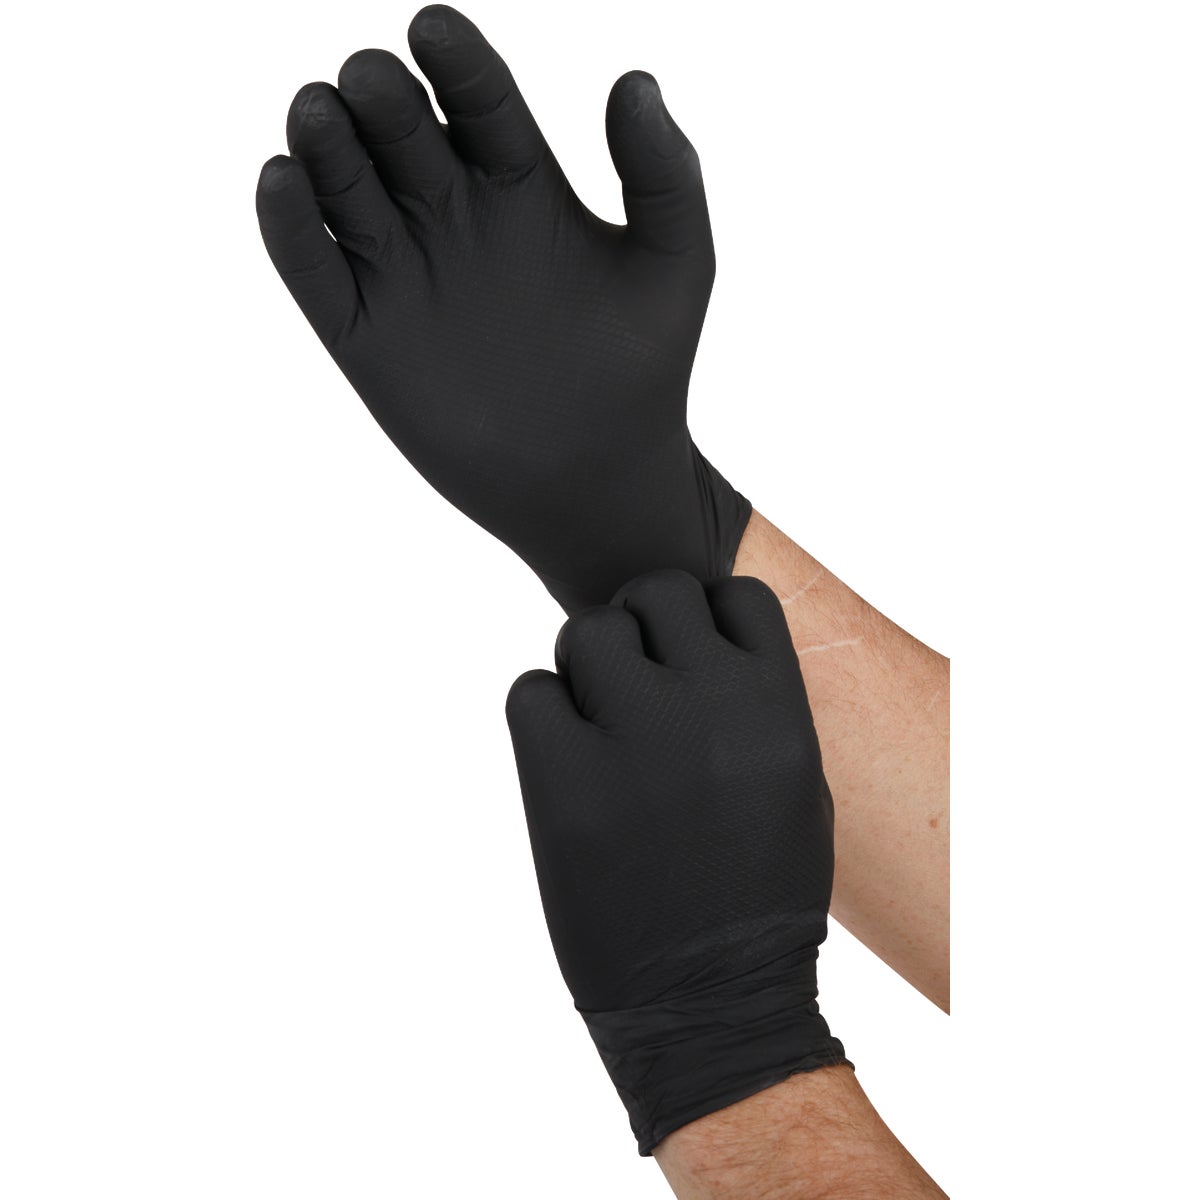 Grippaz Large Black Nitrile Fish Scale Texture Disposable Gloves (50-Pack)